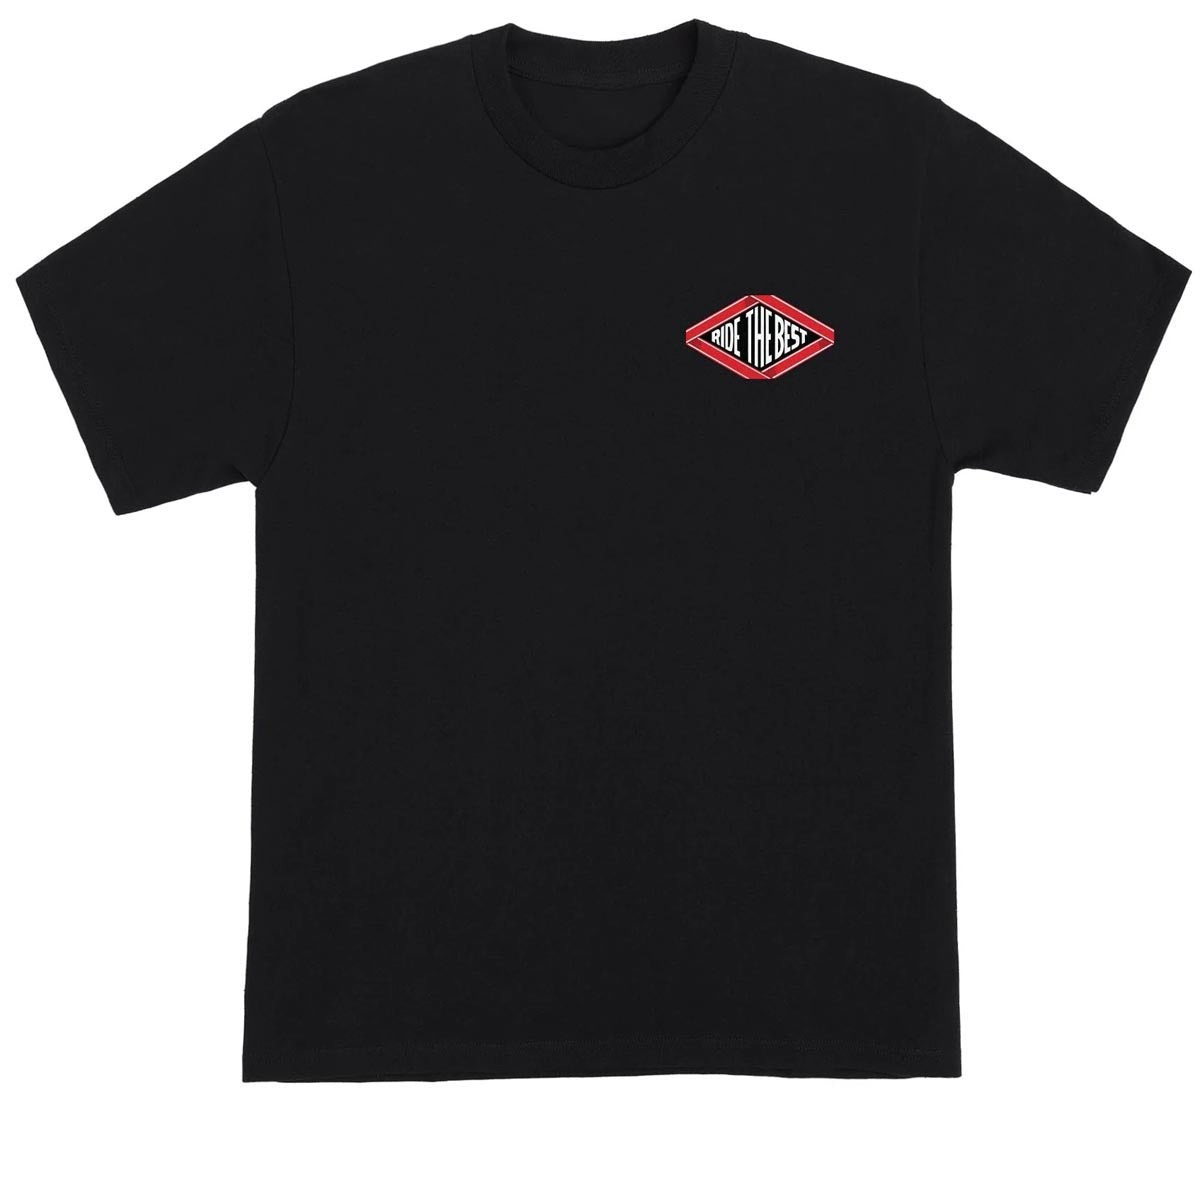 Independent Summit Scroll T-Shirt - Black image 2